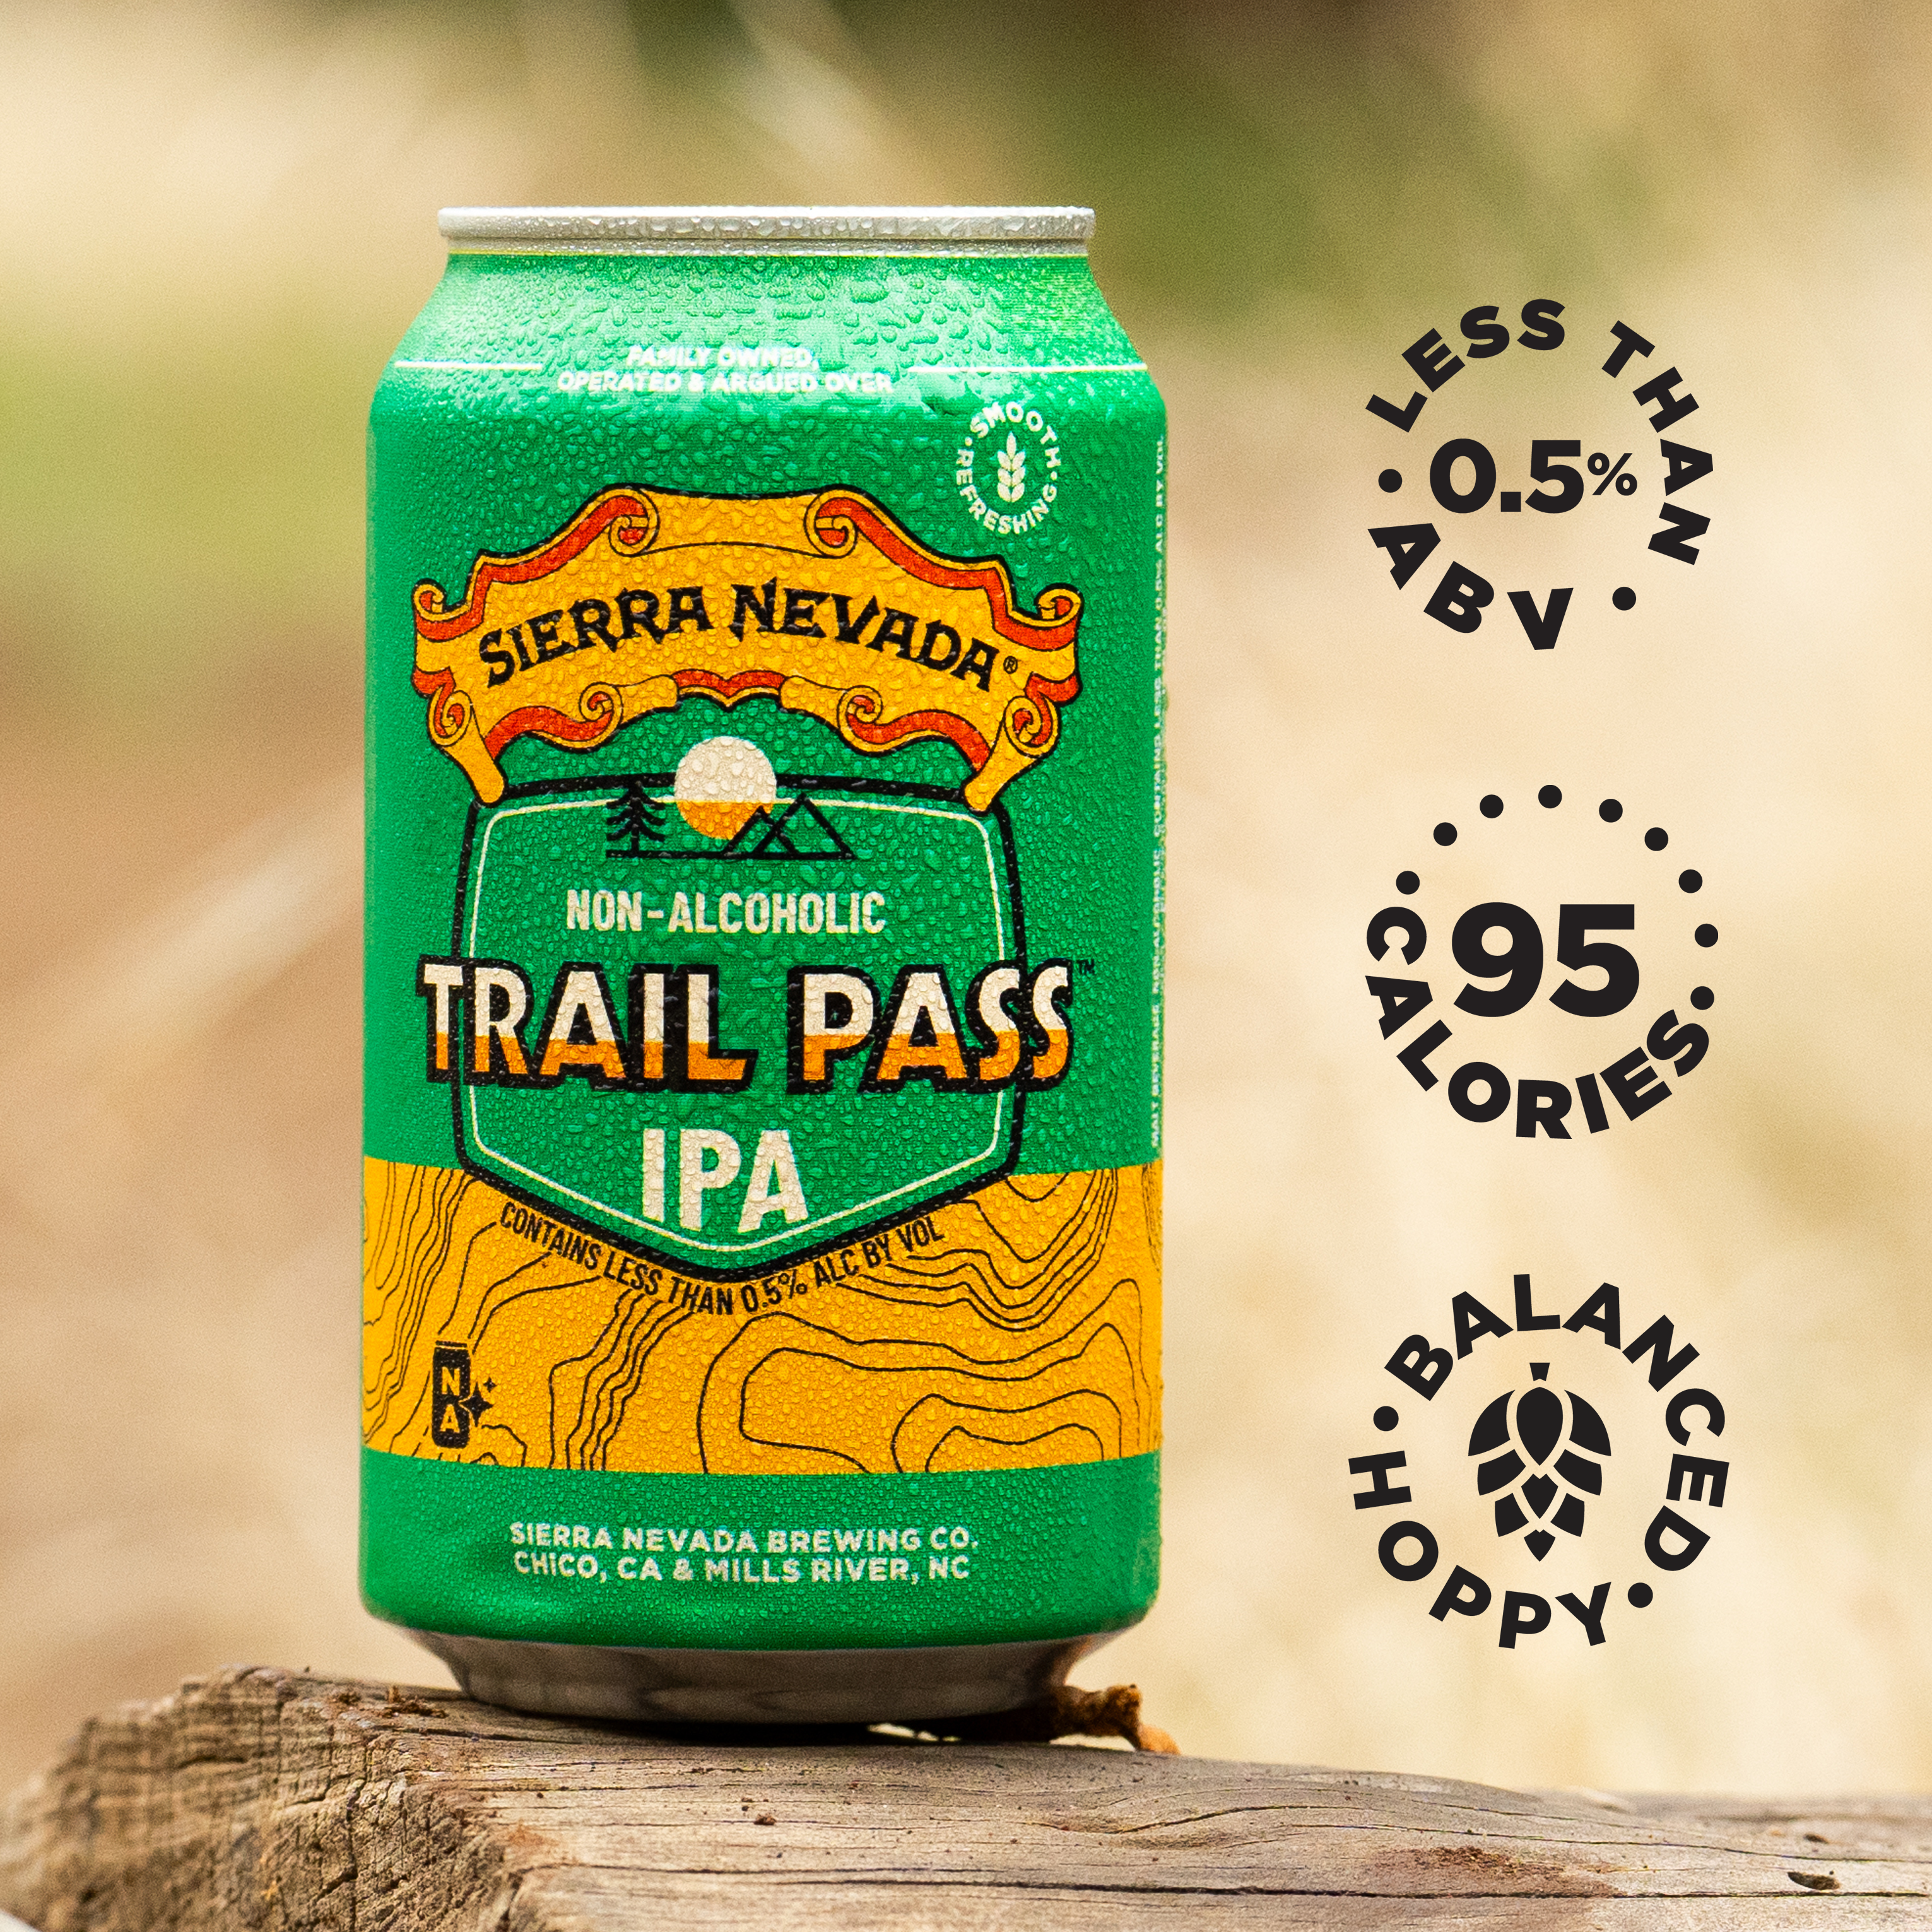 Sierra Nevada Trail Pass Non-Alcoholic IPA 12oz can with nutritional information icons